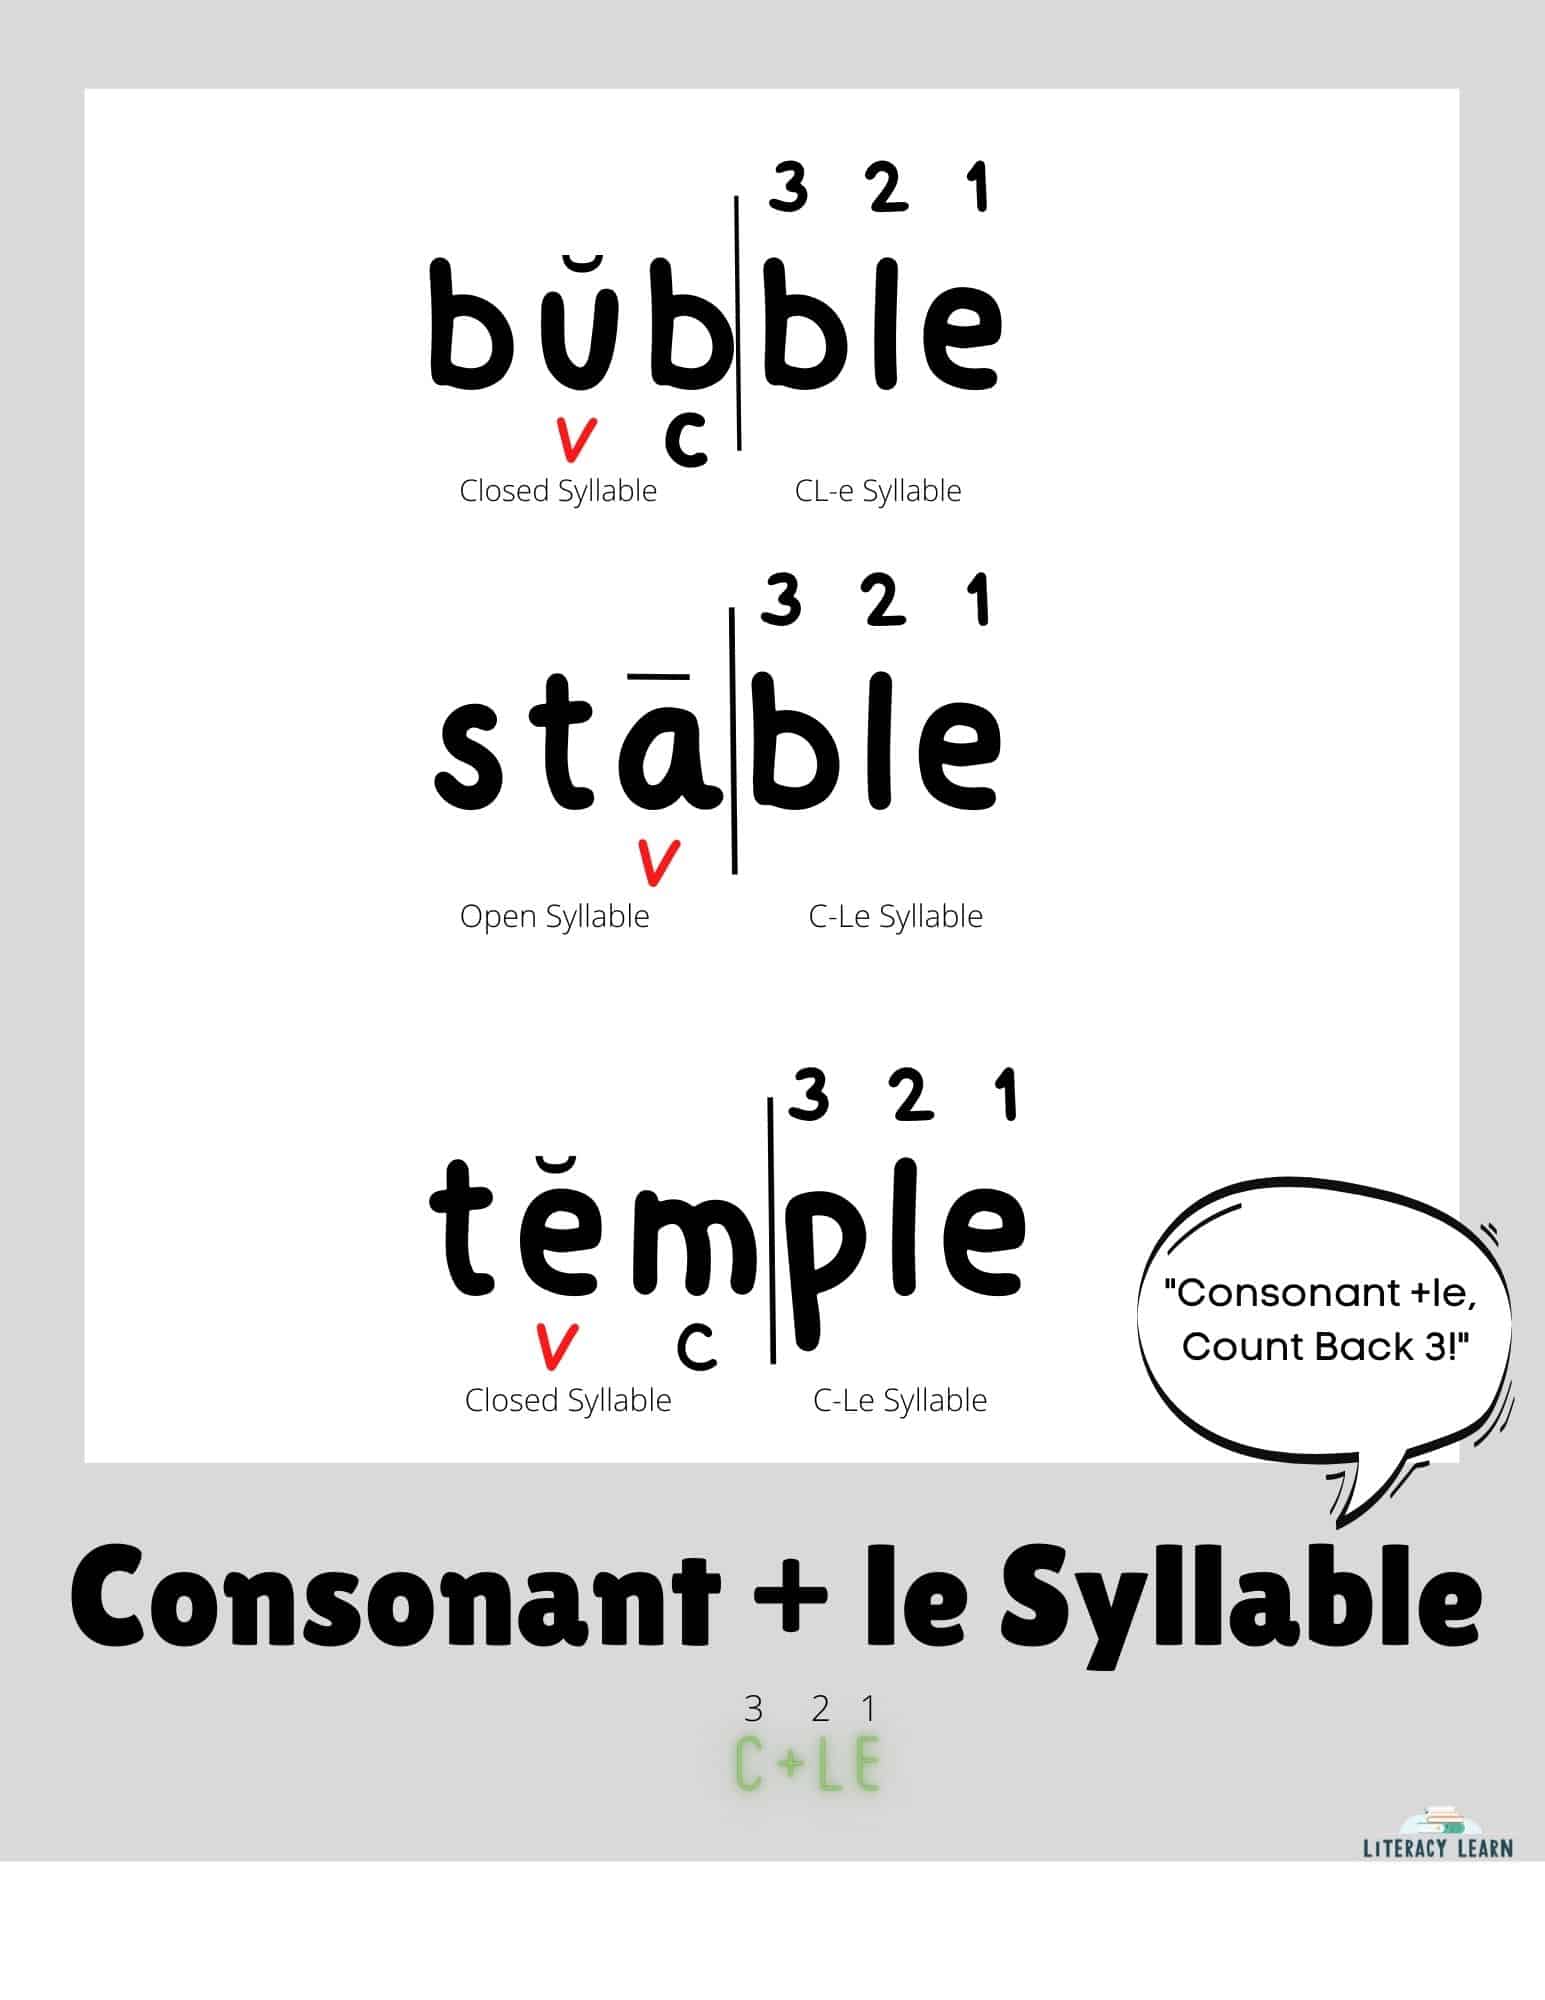 Visual to show Consonant-le words divided into syllable with markings.